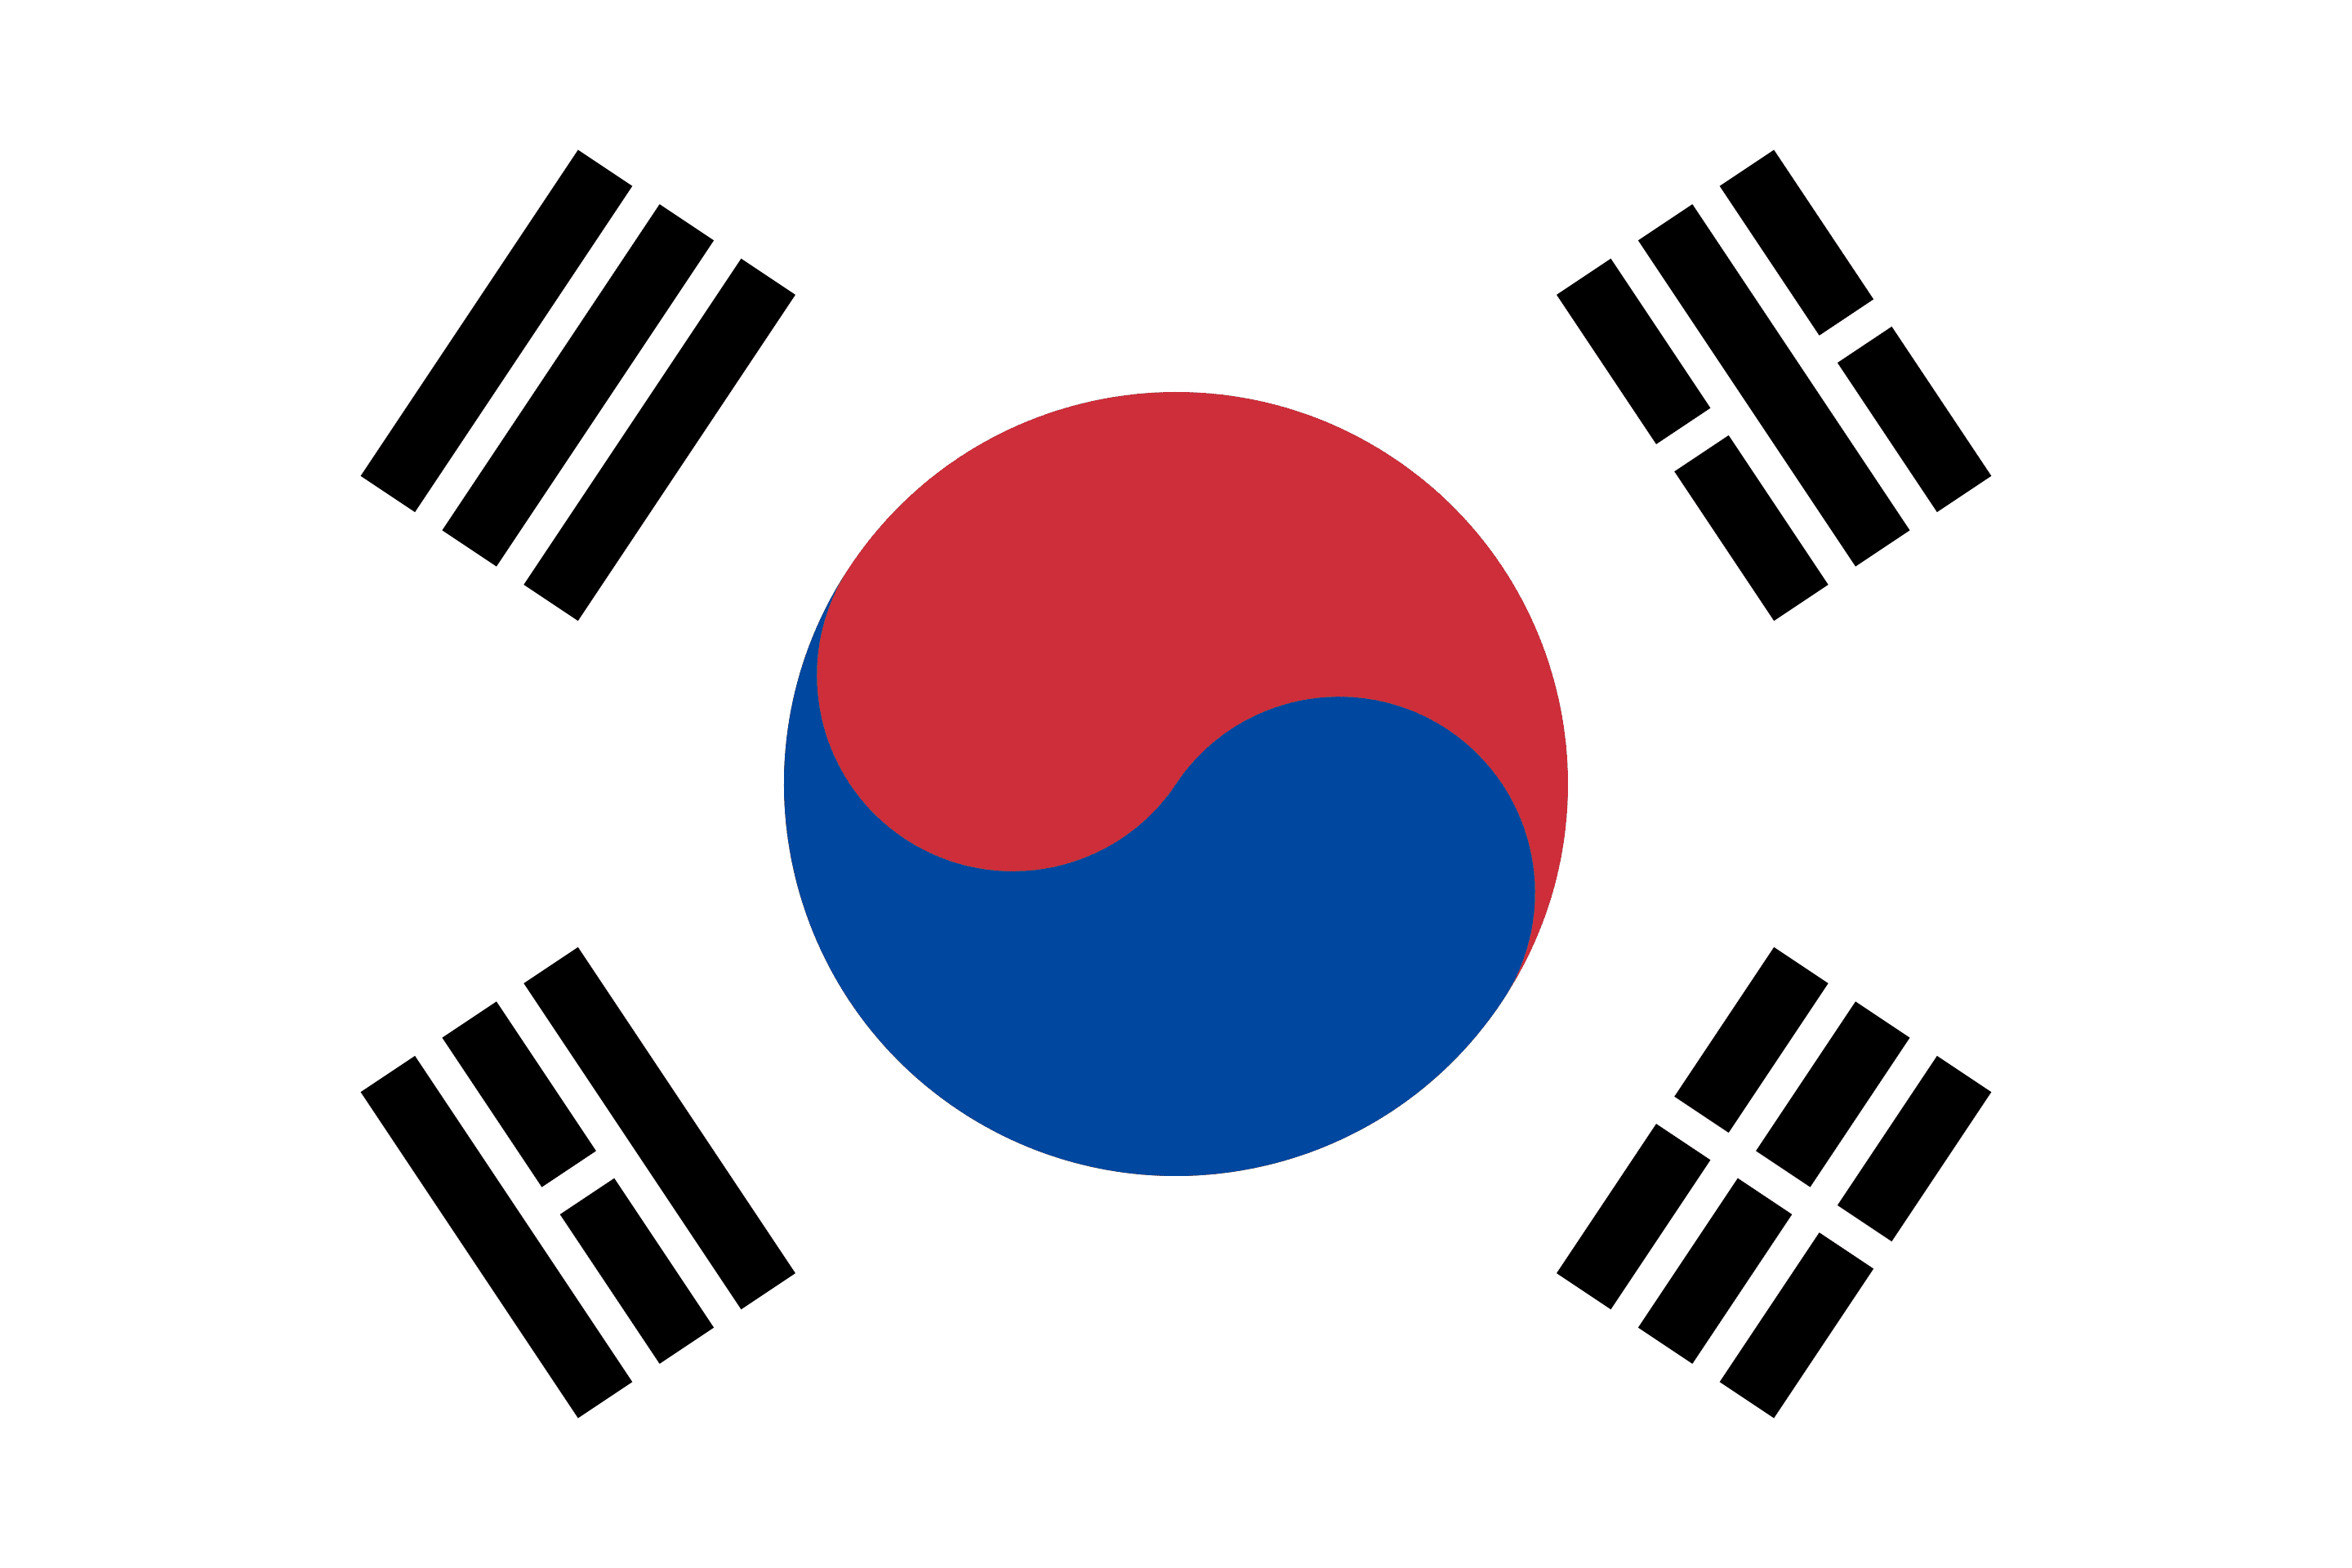 Facts of South Korea